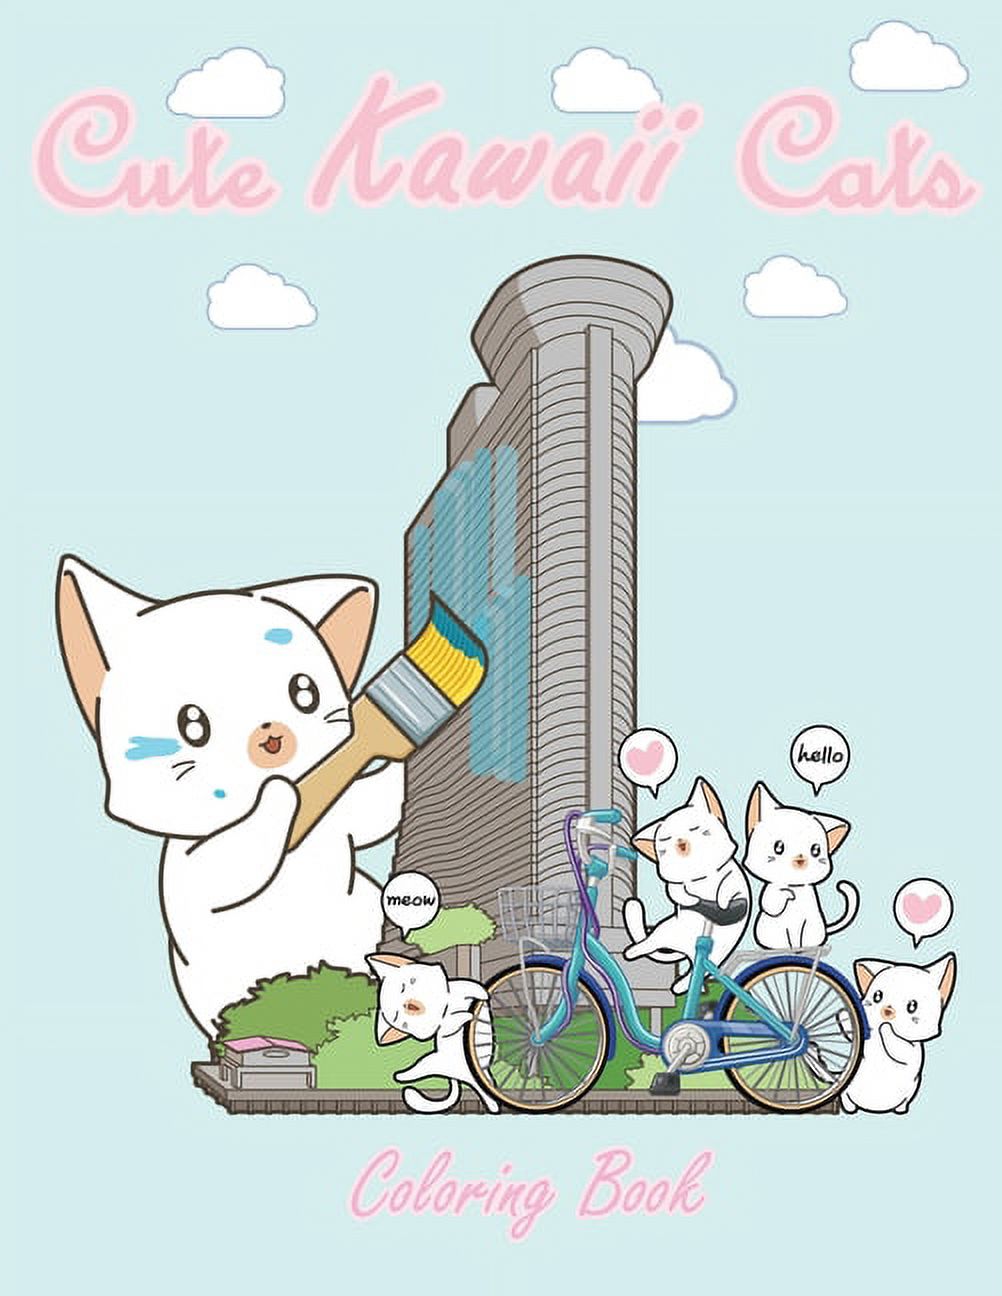 Cute Kawaii Cats Coloring Book: Cute Japanese Style Coloring Pages for Adults and Kids, Kawaii Cats Coloring Books, 8.5 X 11 in Large Coloring Book [Book]